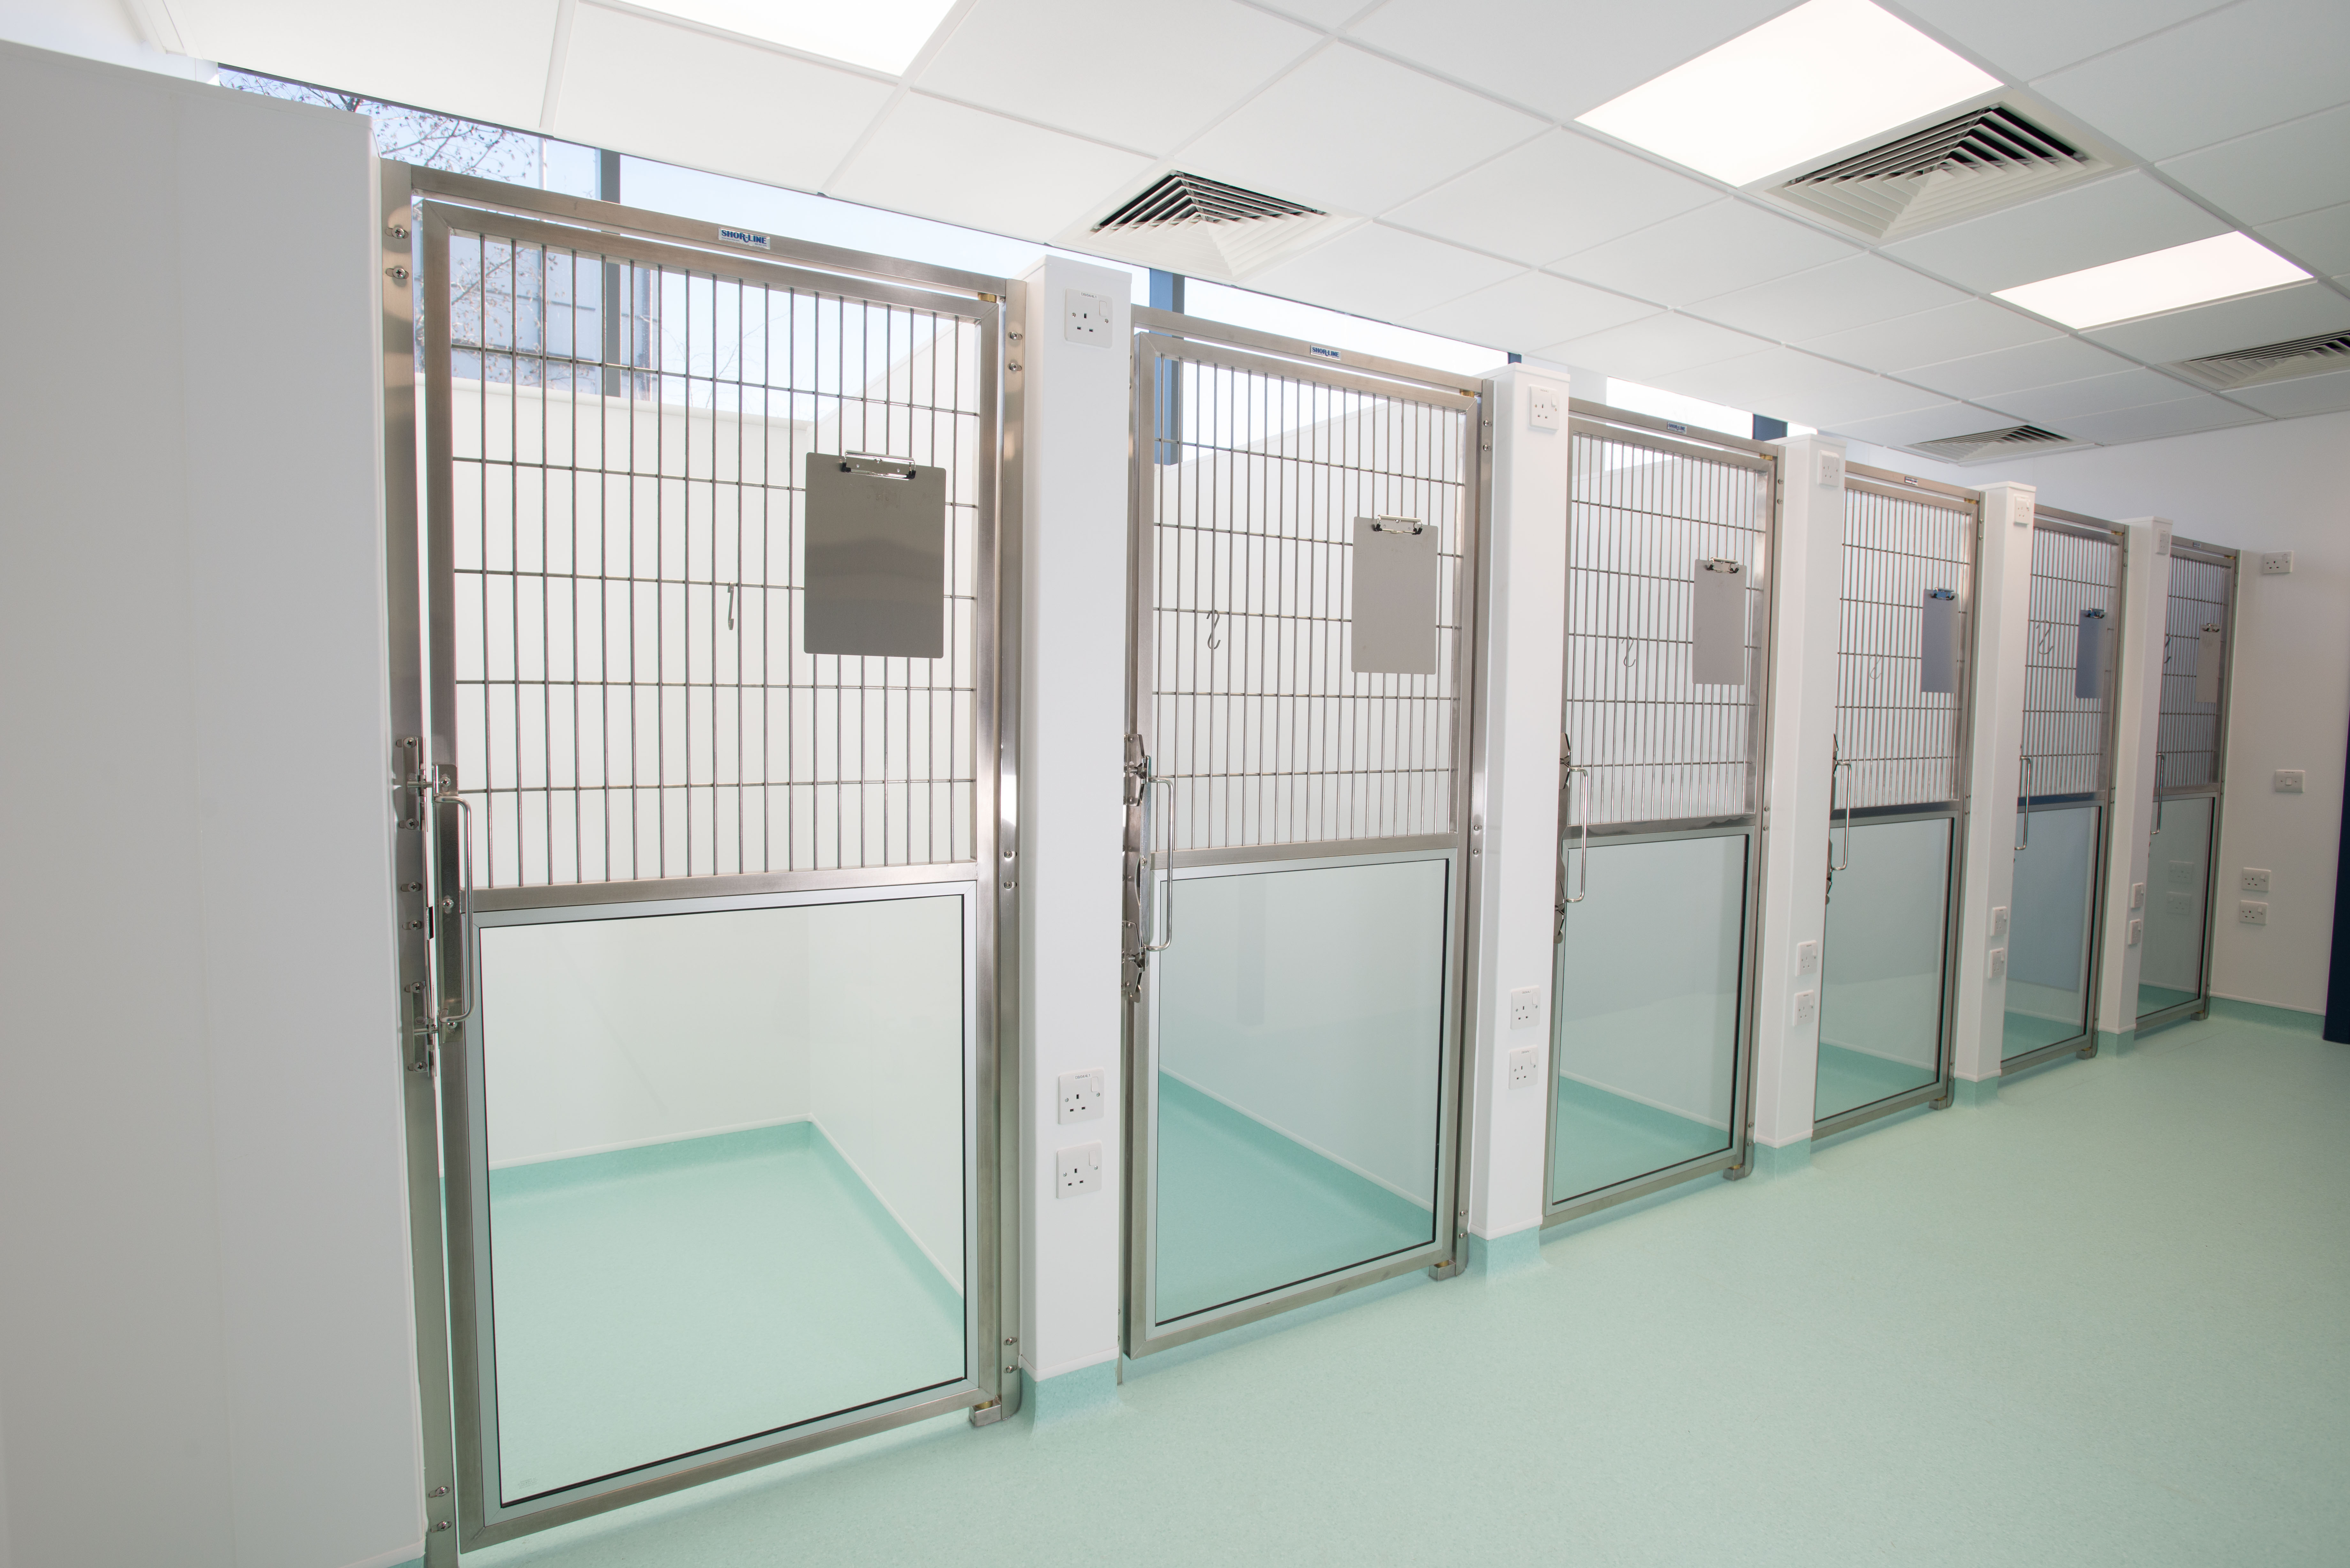 Vets kennels